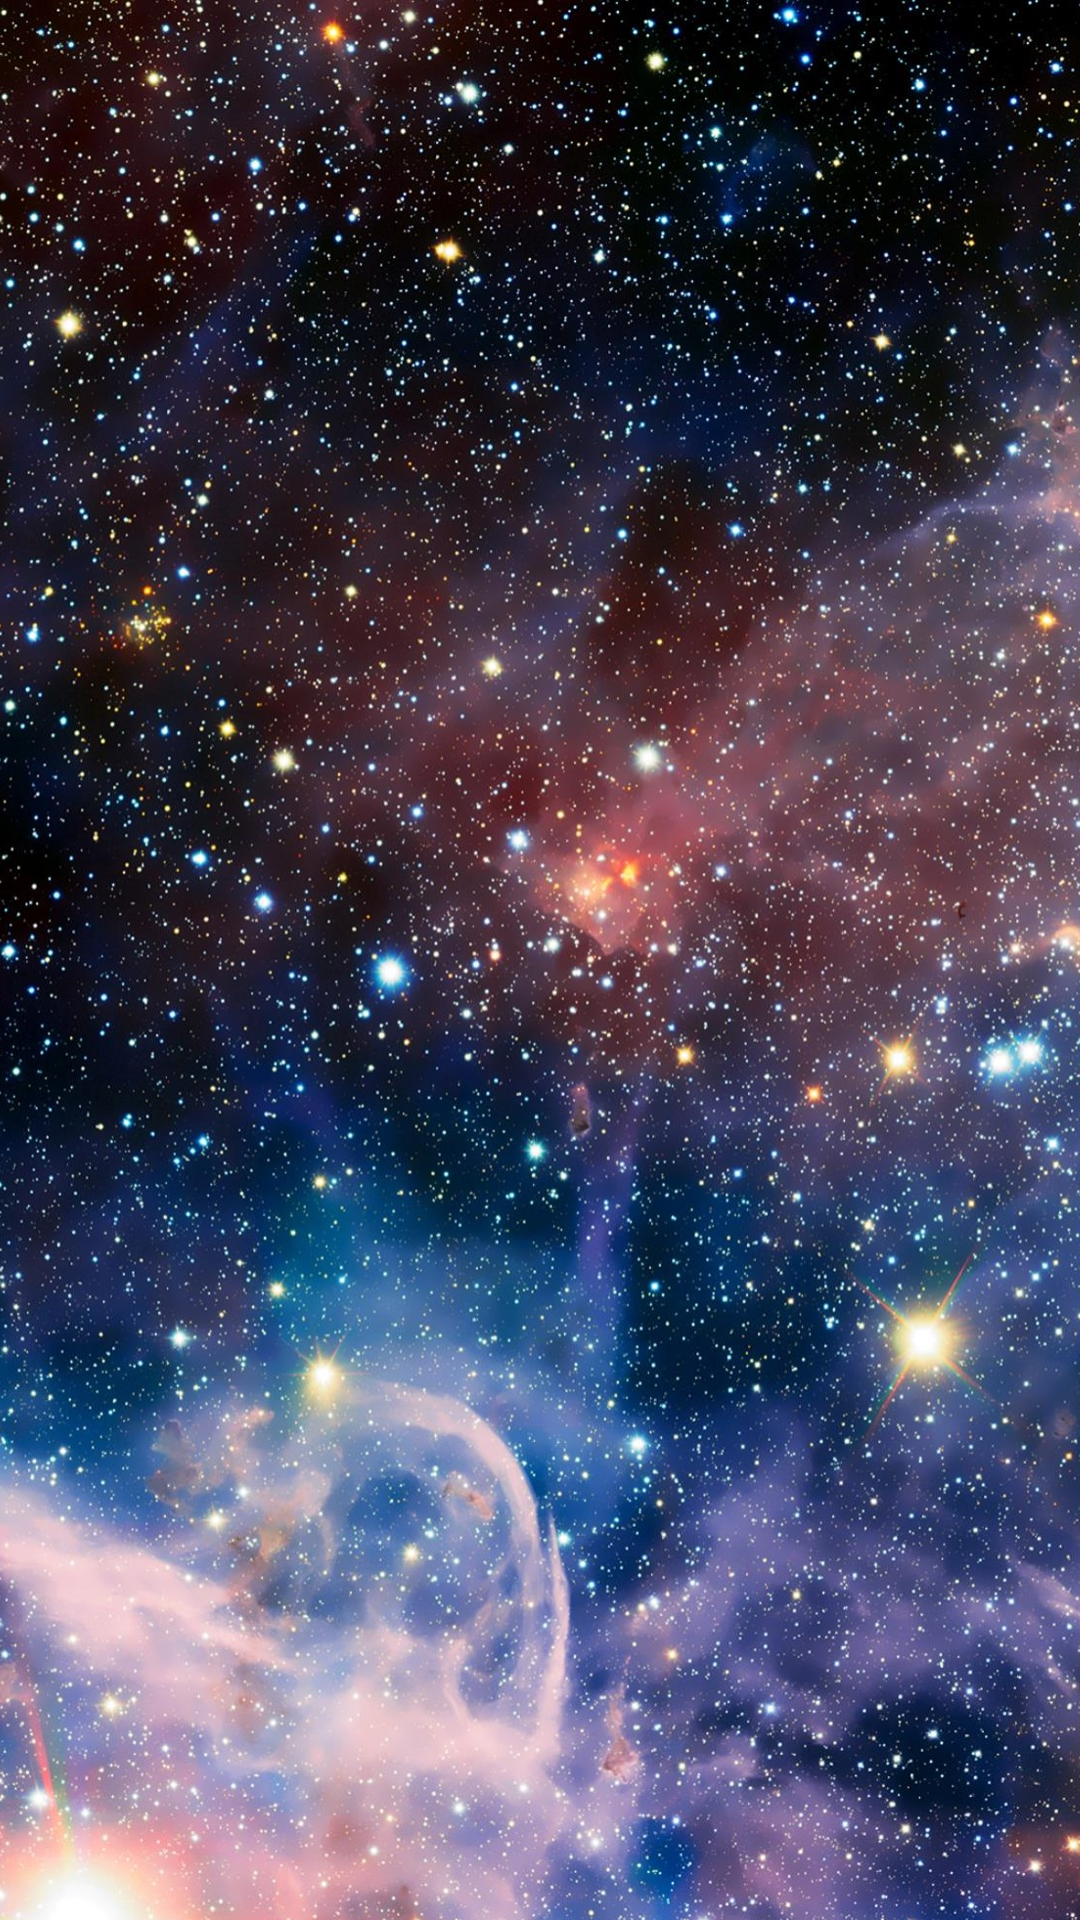 galaxia wallpaper,outer space,sky,galaxy,astronomical object,nebula